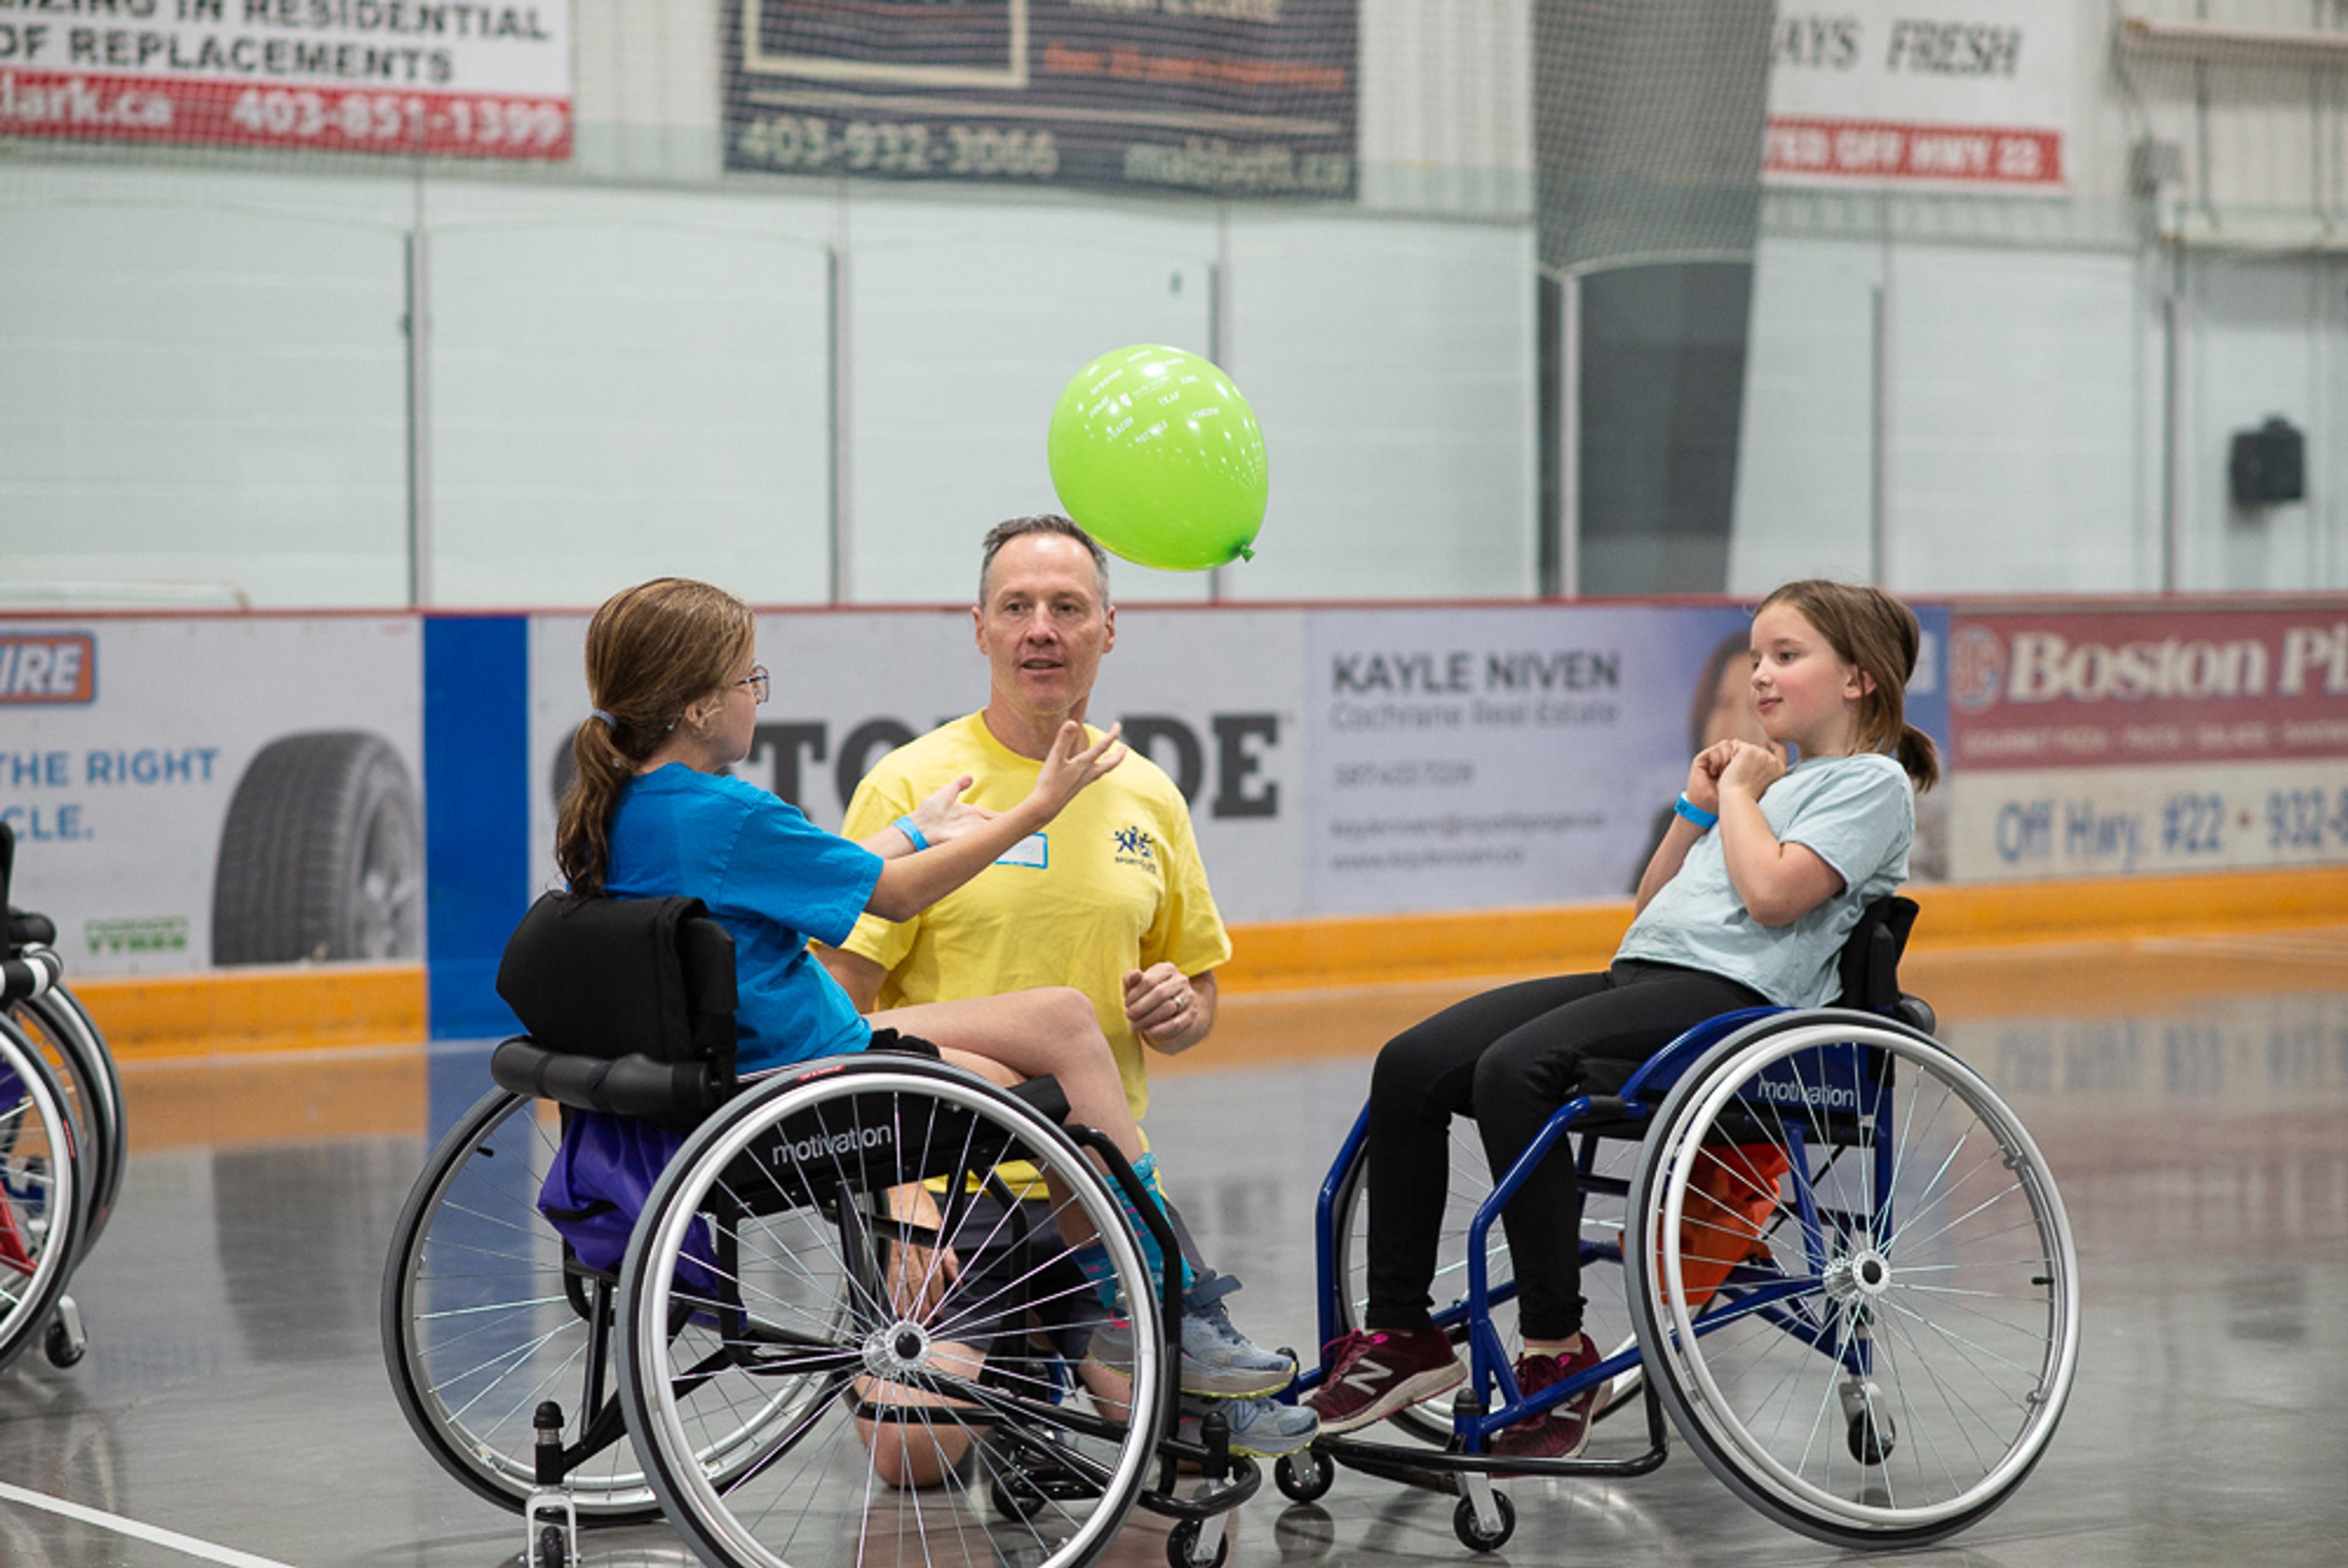 image of 2 young girls in wheelchairs playing with a balloon and a man kneeling helping